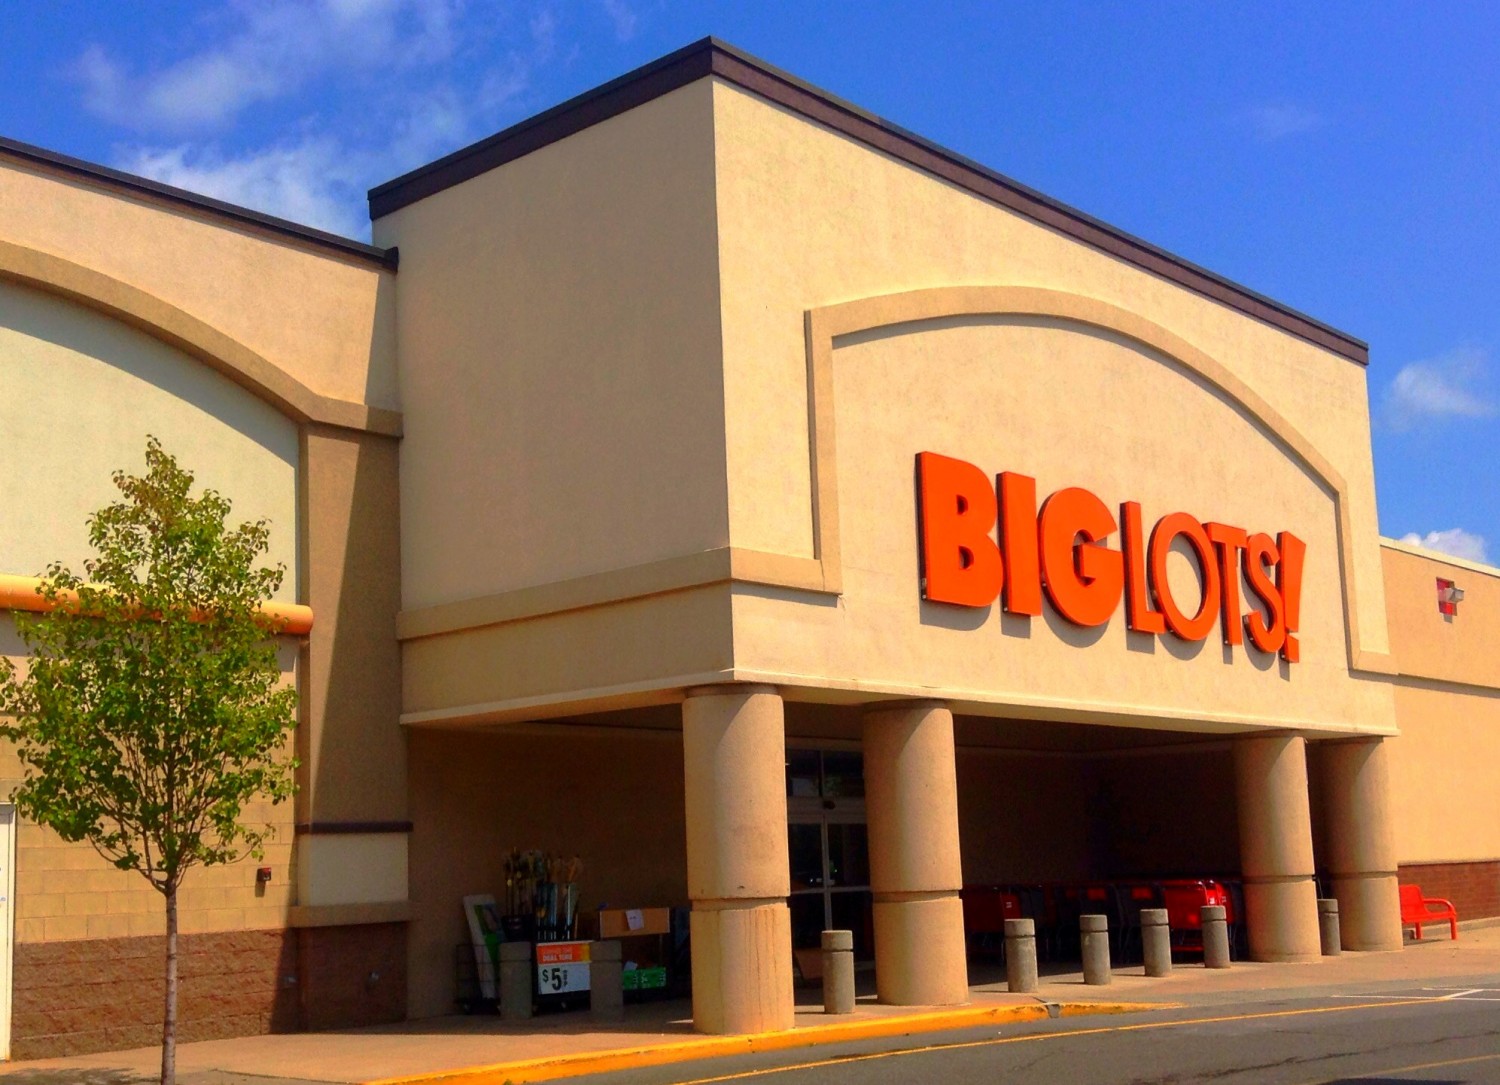 Big Lots Coupon Saves You Up To $100 - DWYM